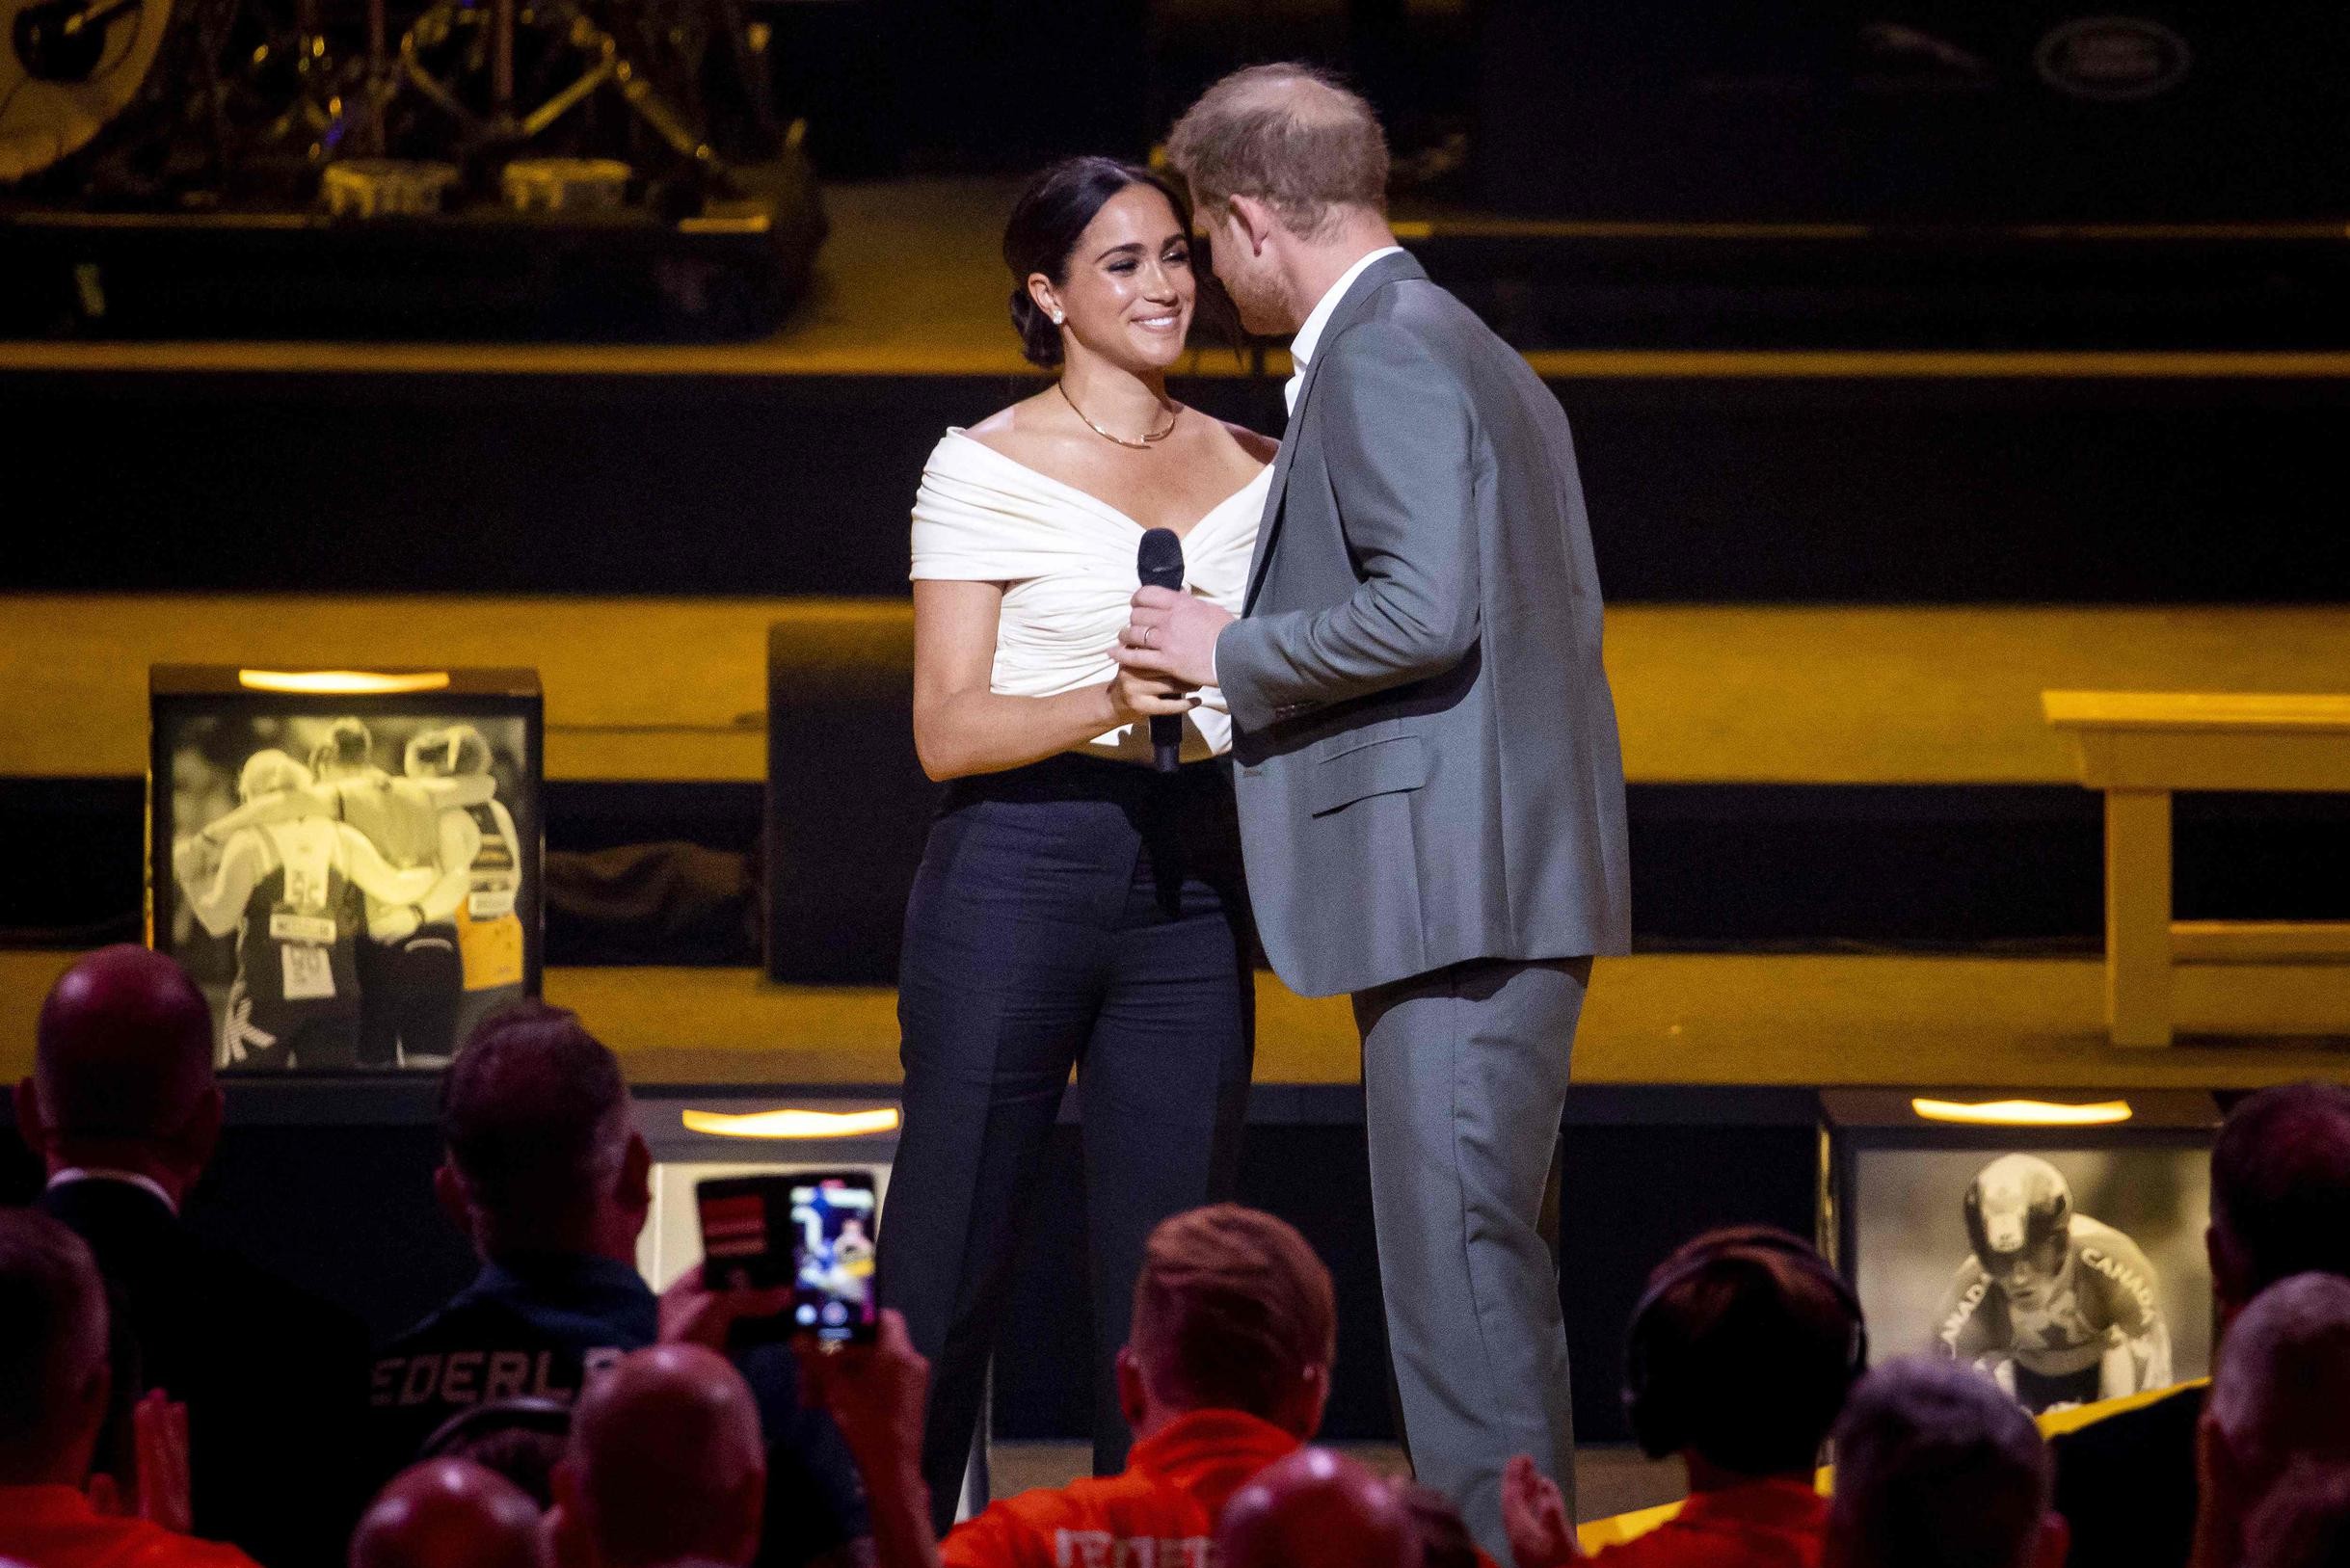 Harry and Meghan show their love for each other during the first day of Invictus Games in The Hague